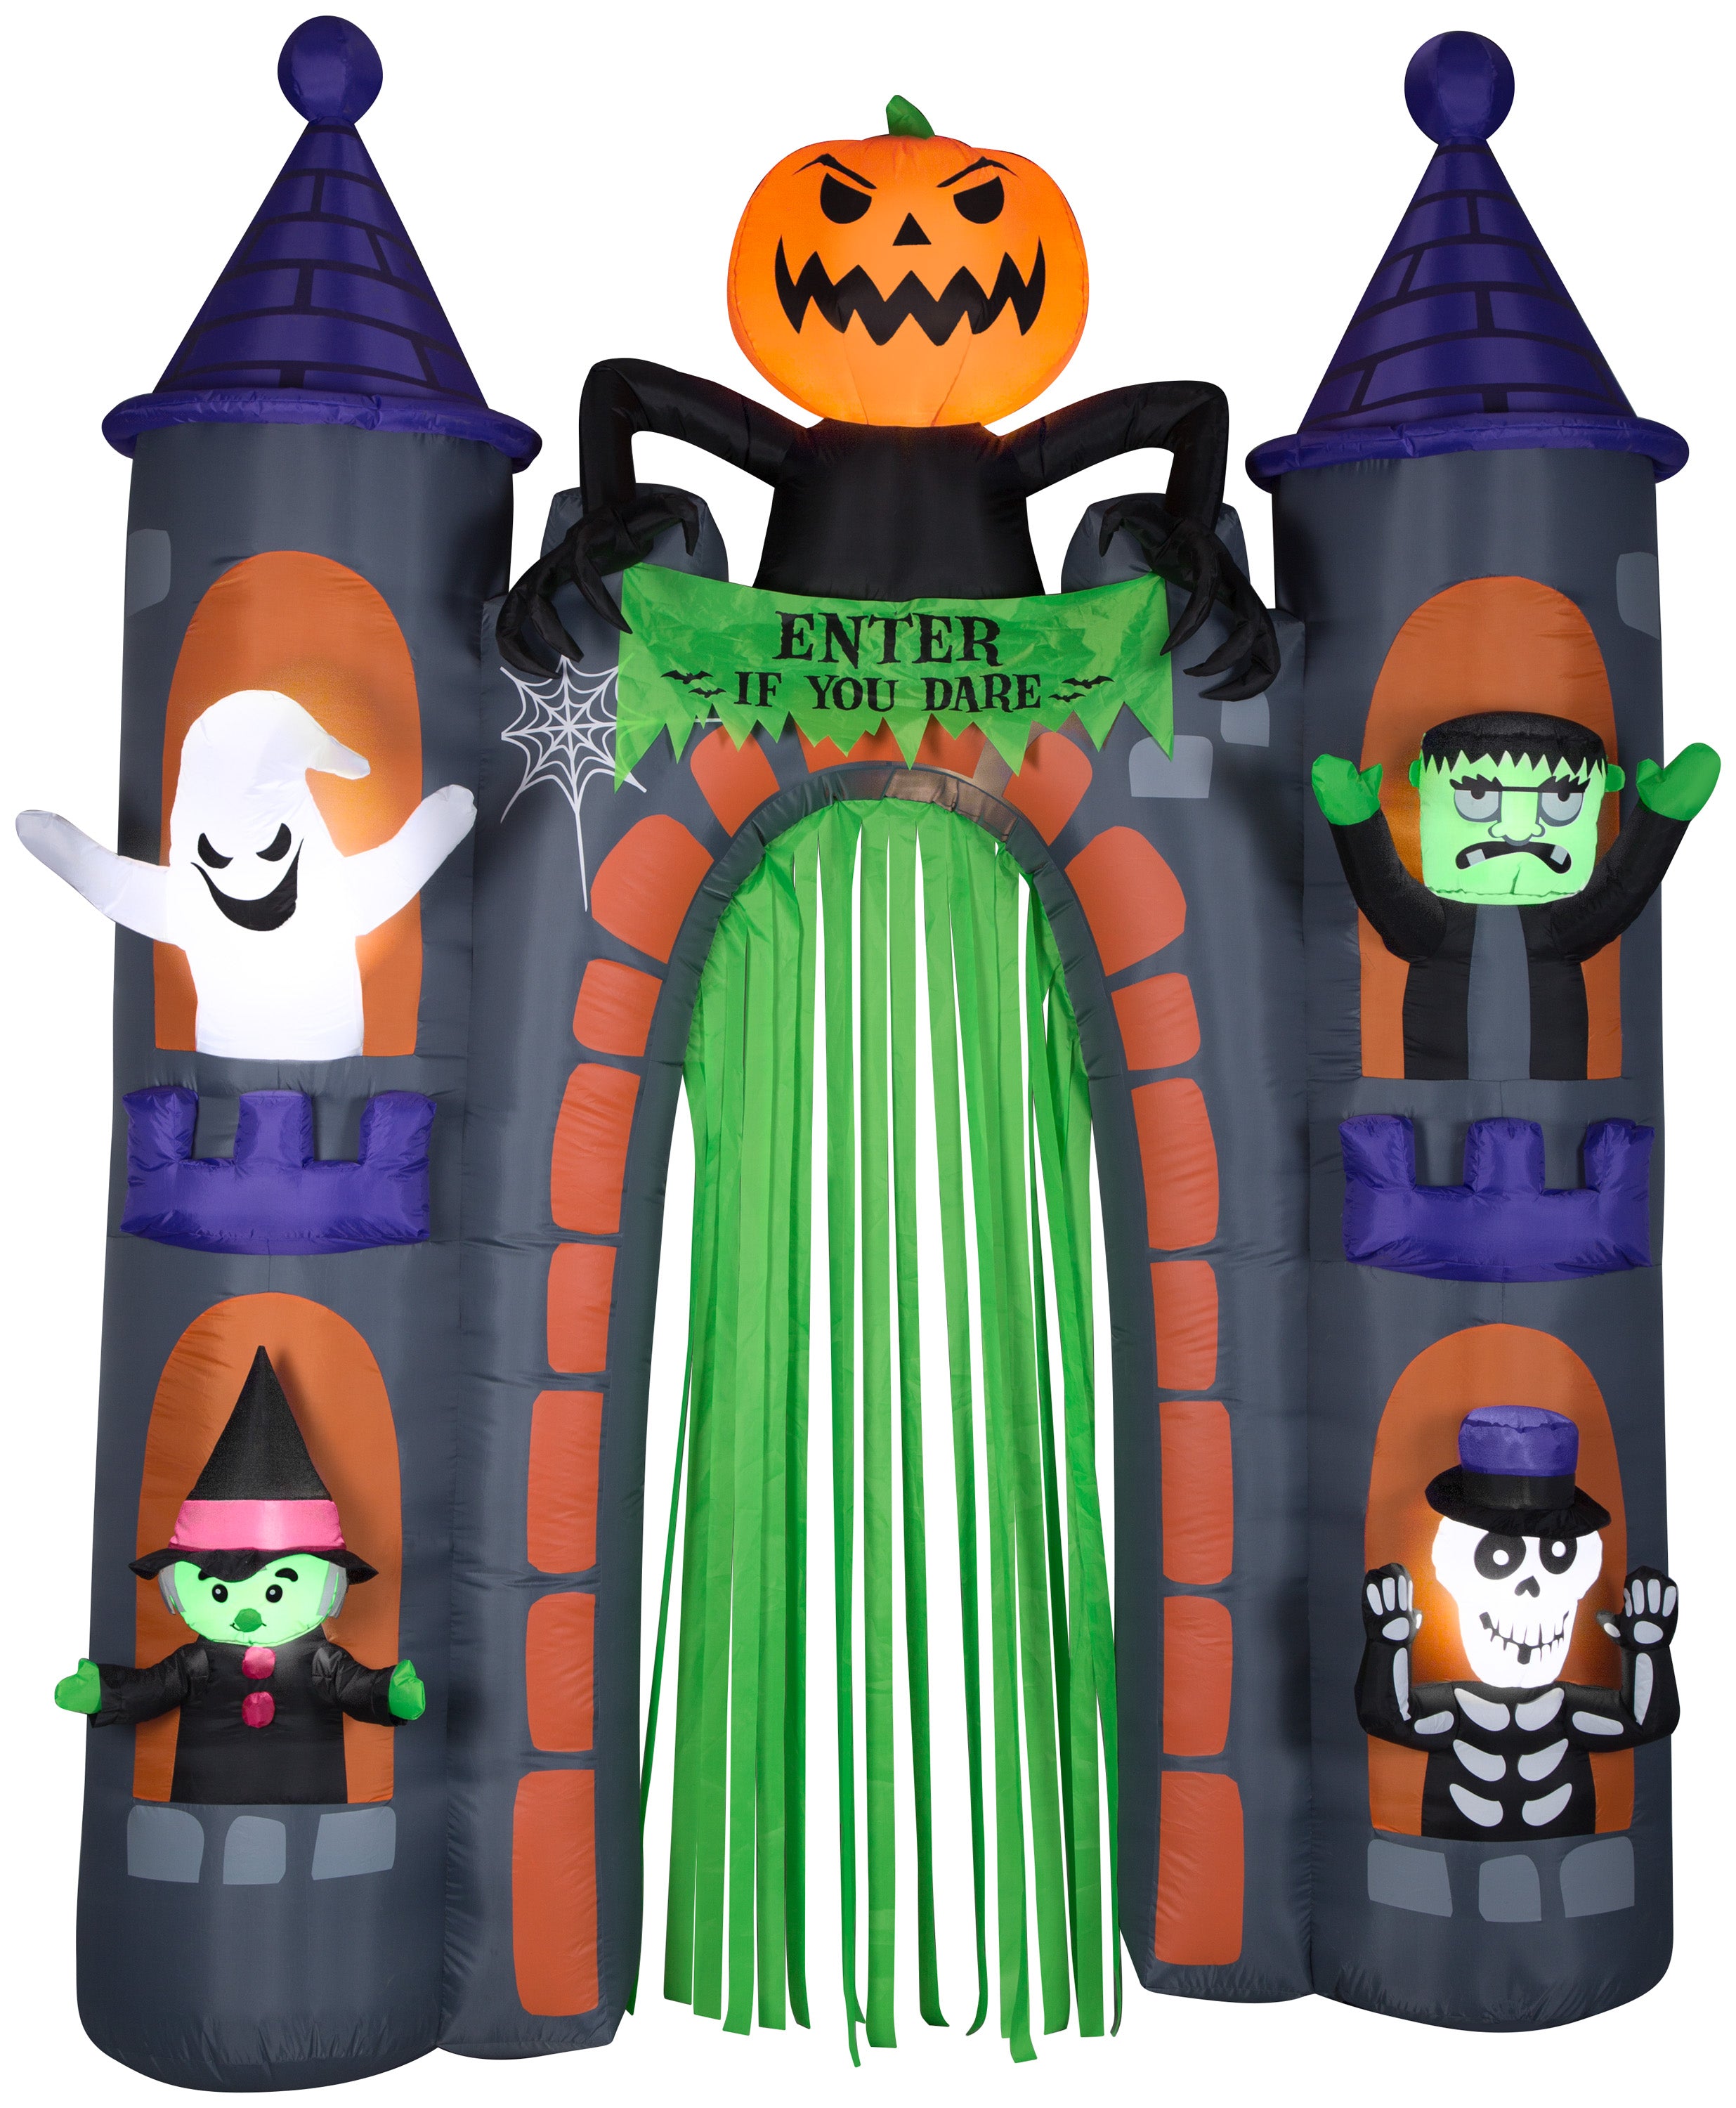 Gemmy Airblown Archway Haunted Castle w/Characters Scene, 9 ft Tall, Purple